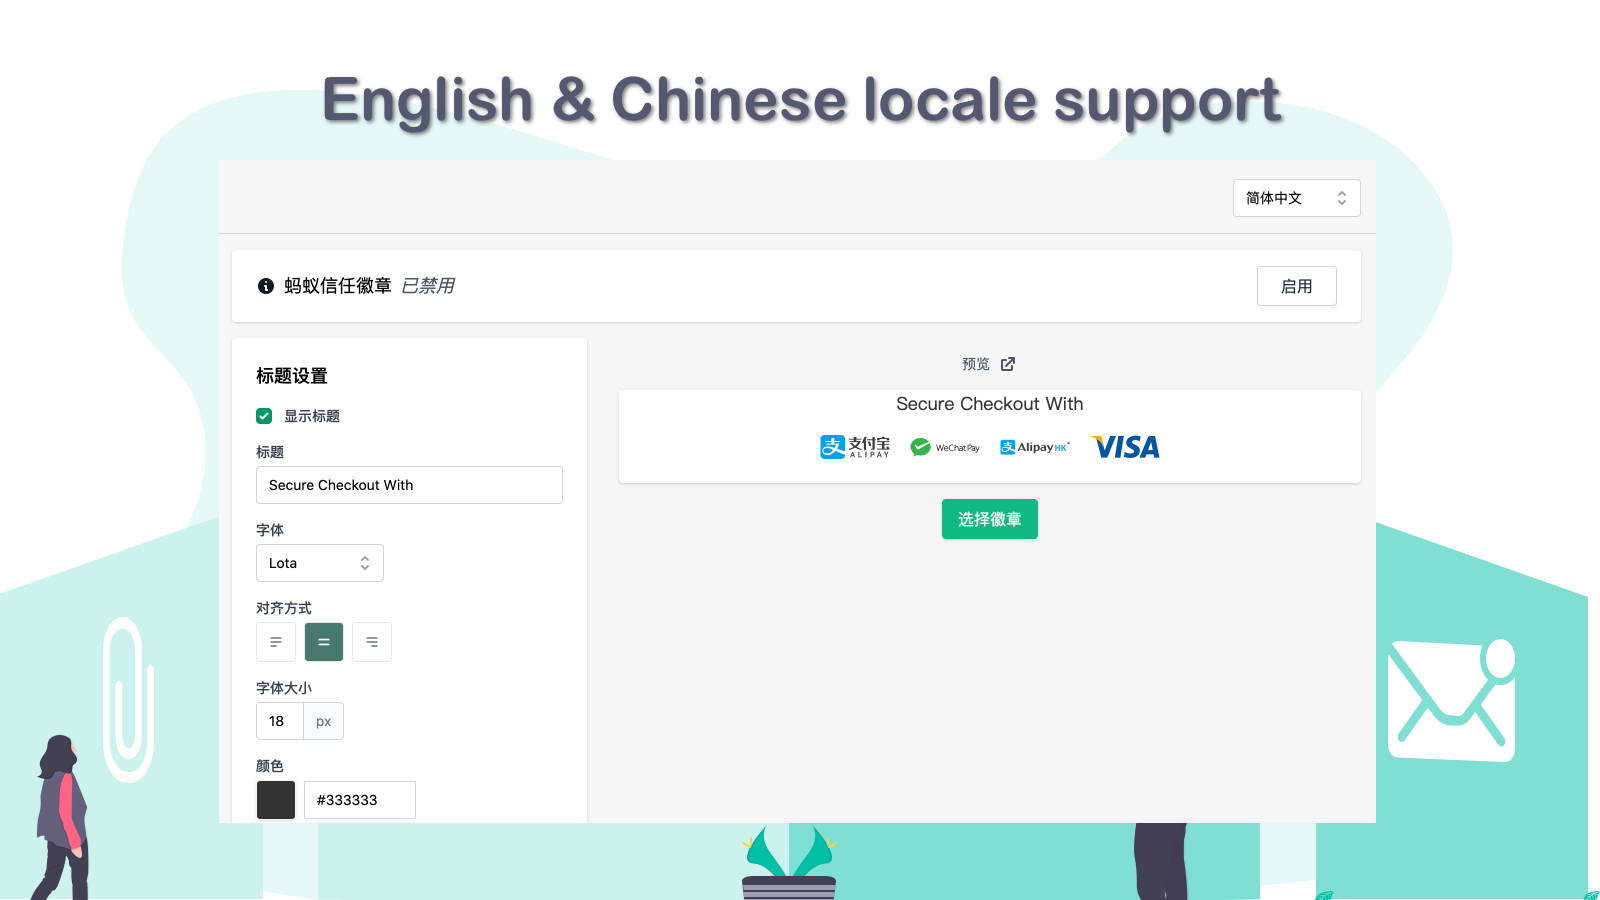 English & Chinese locale support